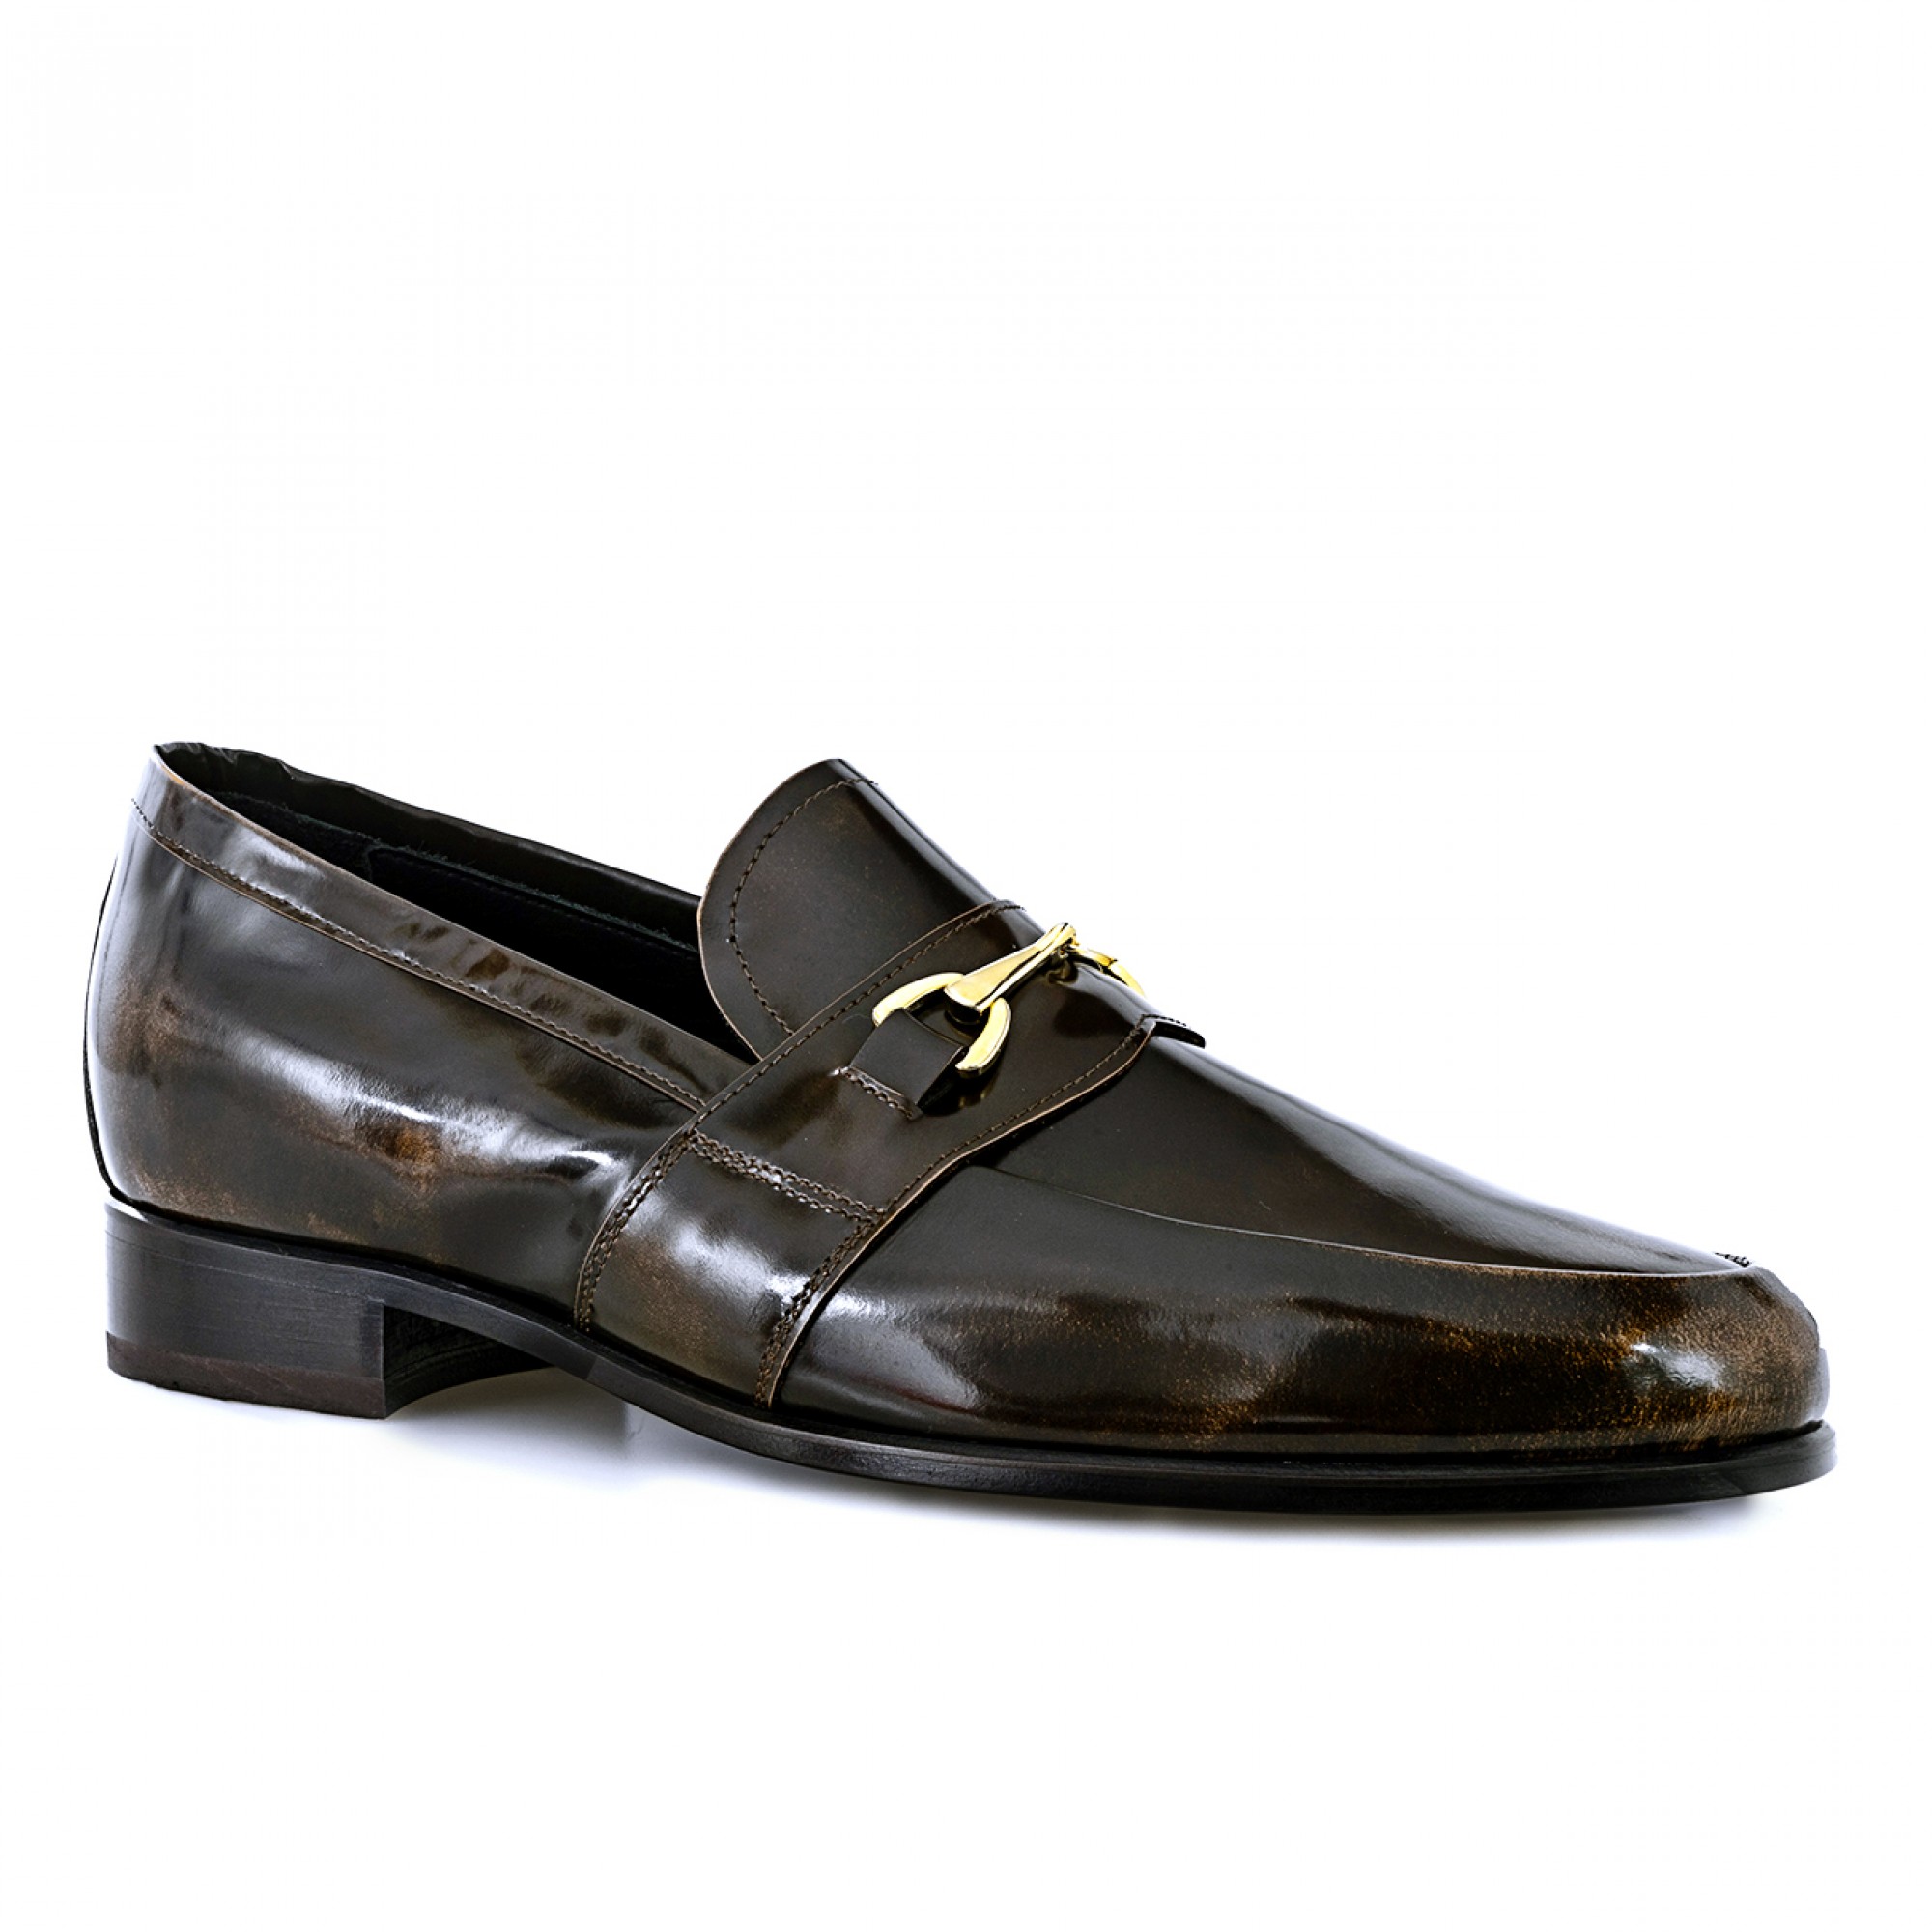 Lausanne - Elevator Loafers in Brushed Leather up to 2.6 inches